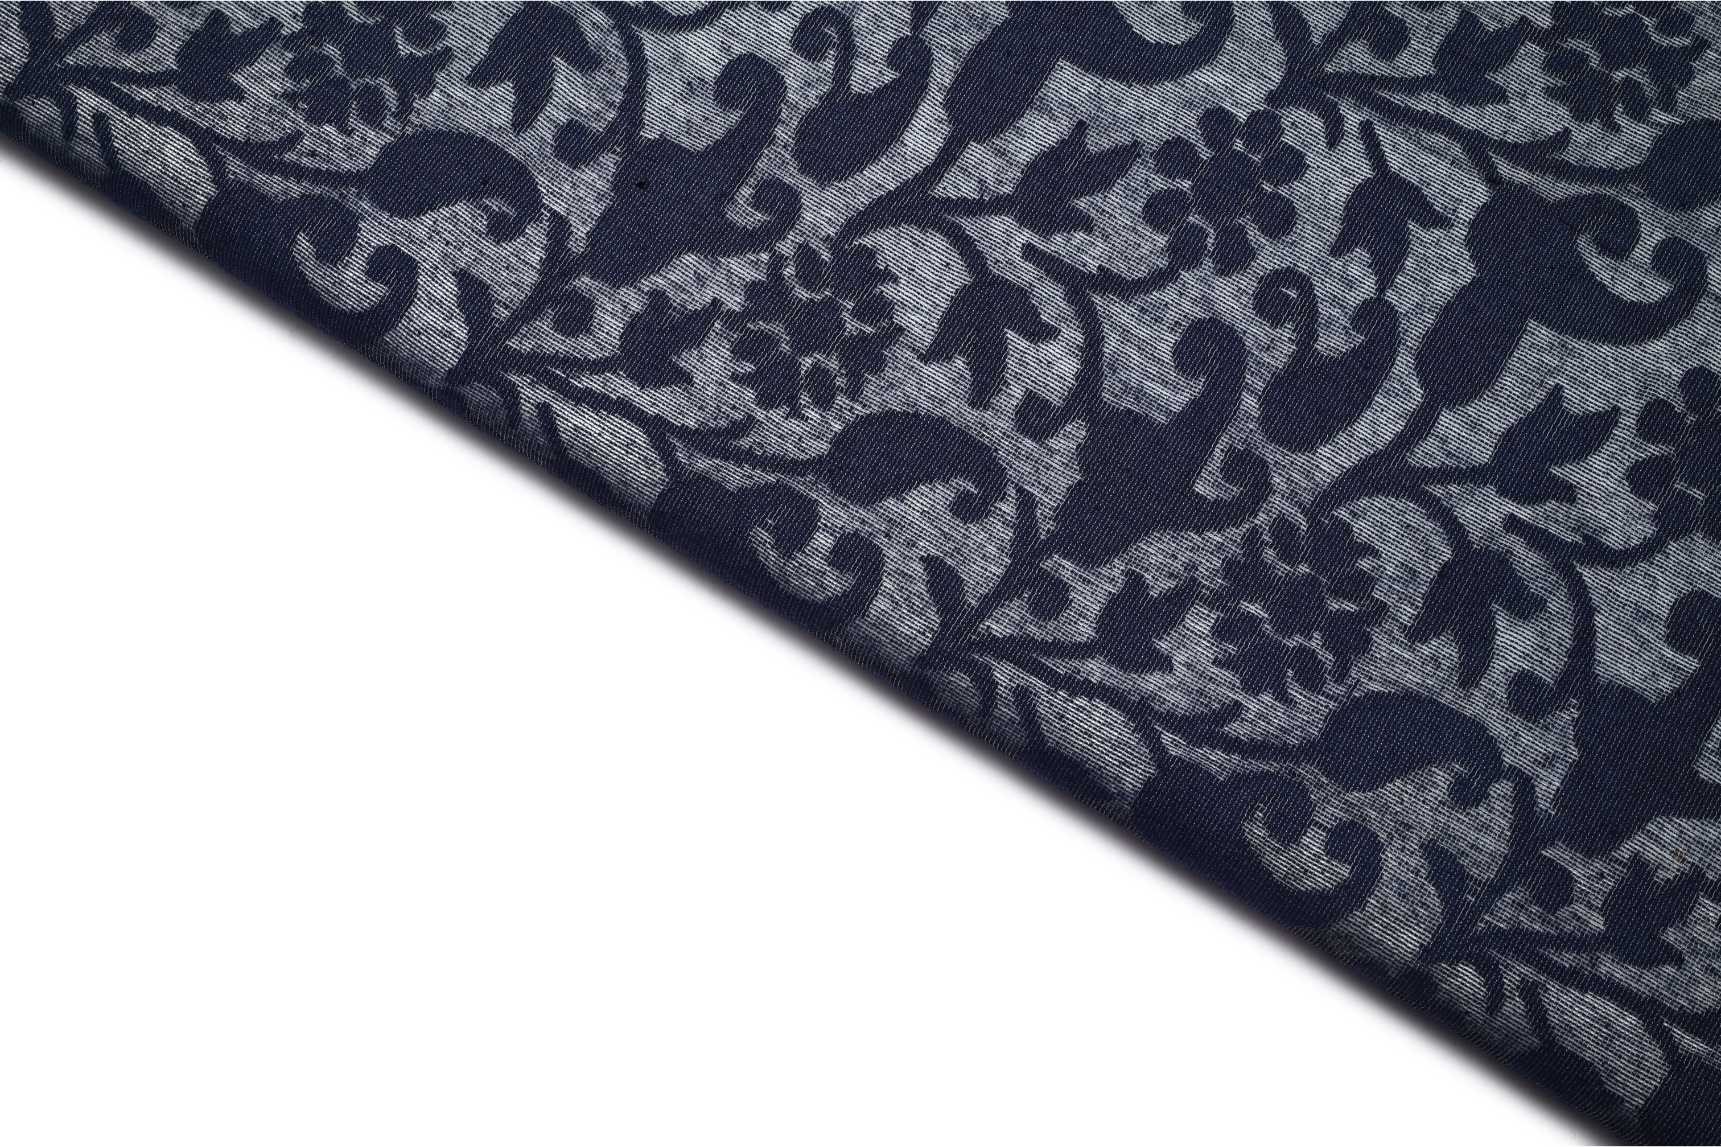 DEEP DENIM BLUE COLOR COTTON ZOOT TEXTURE WITH JAQARD PAISLEY BRASSO PATTERN WEAVE FABRIC 11198